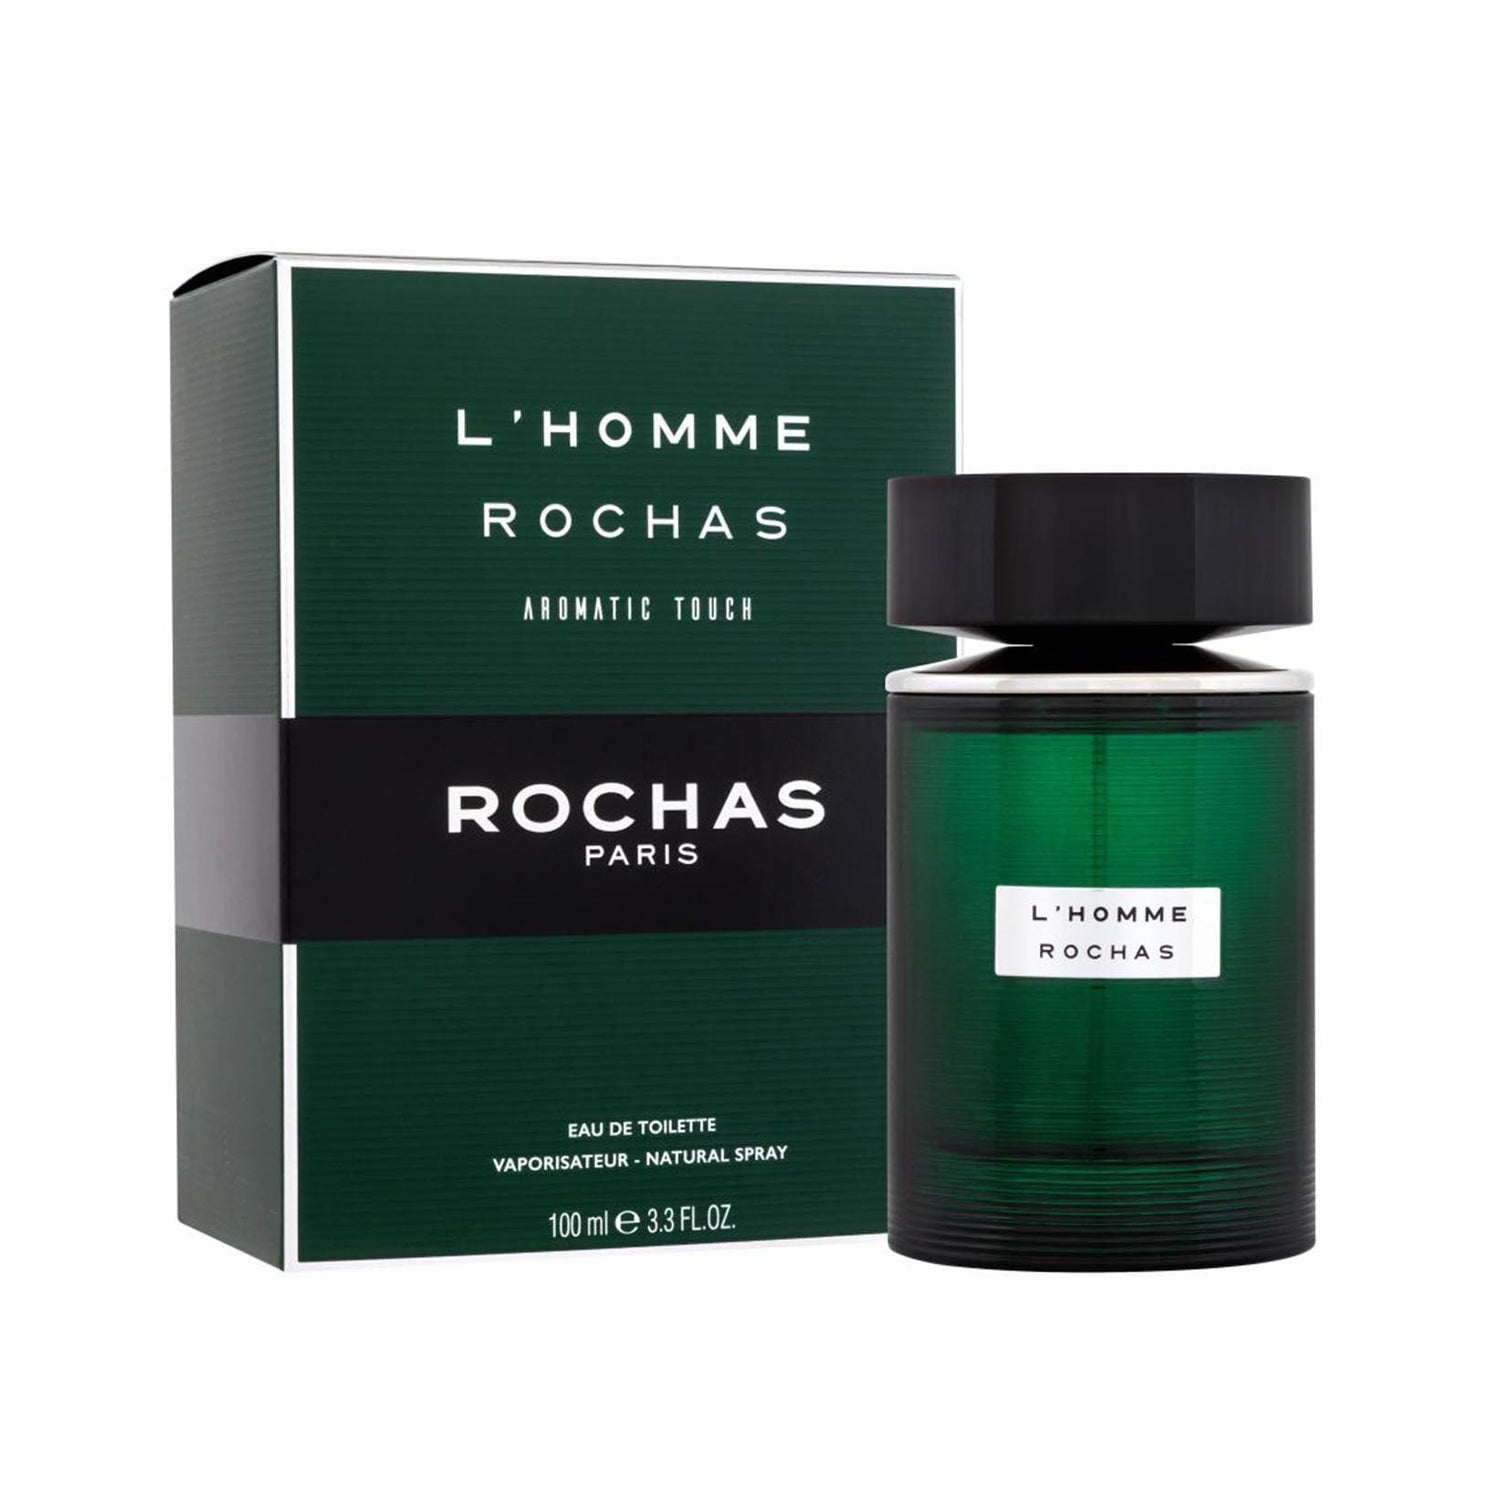 Rochas L'Homme Aromatic Touch EDT M 100ml Spray Boxed